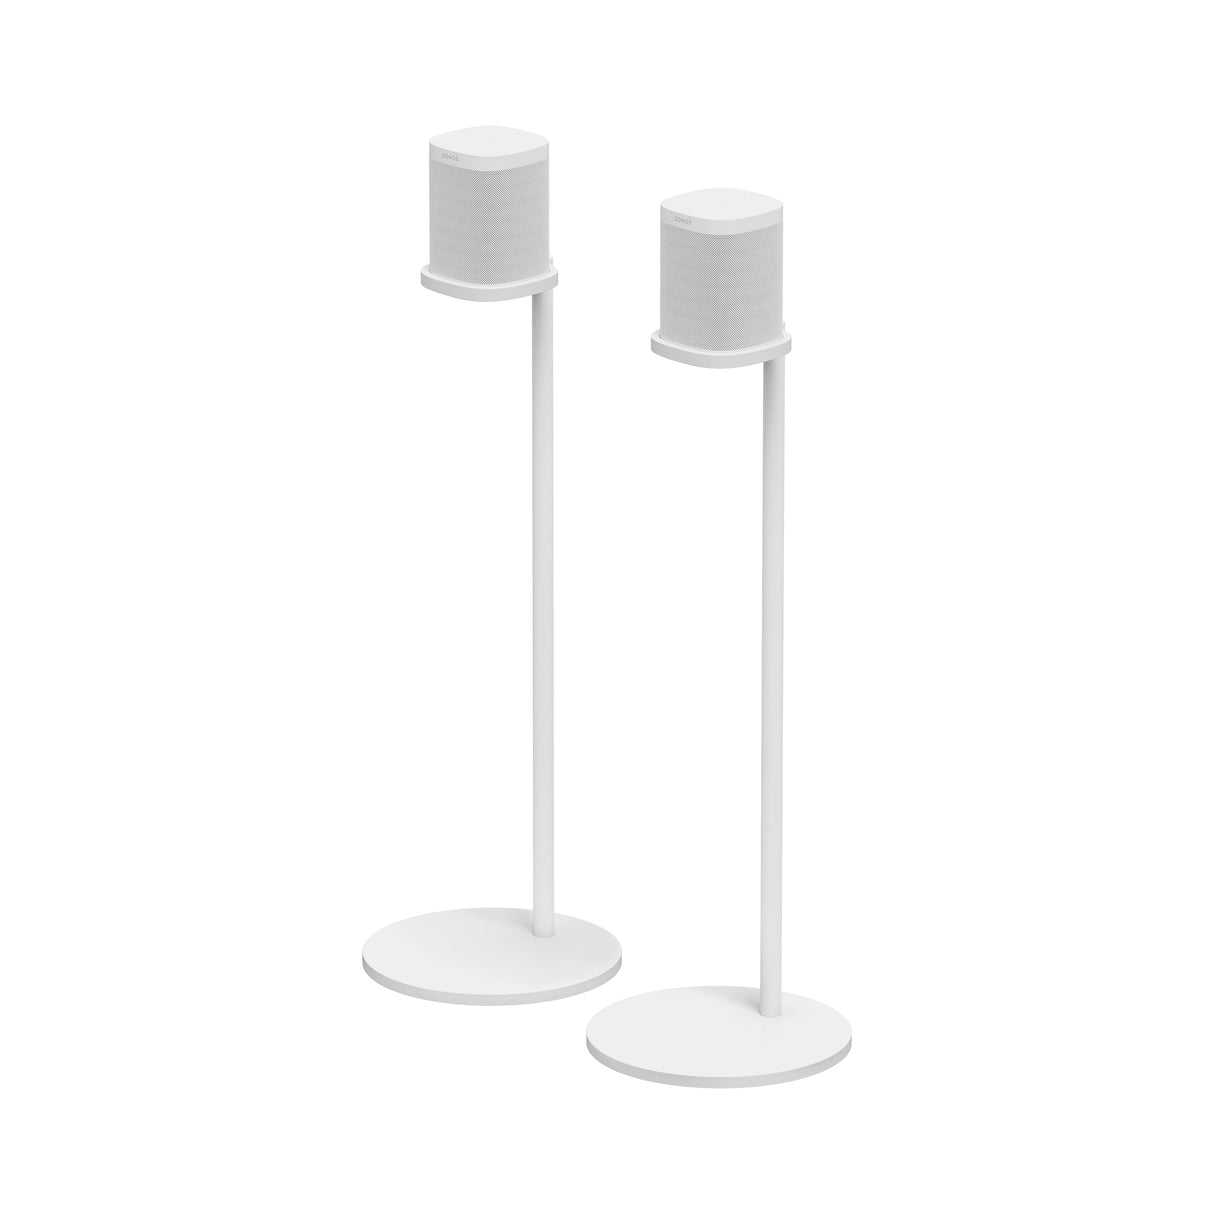 Sonos One Stand for Sonos One and One SL (Pair) (White)